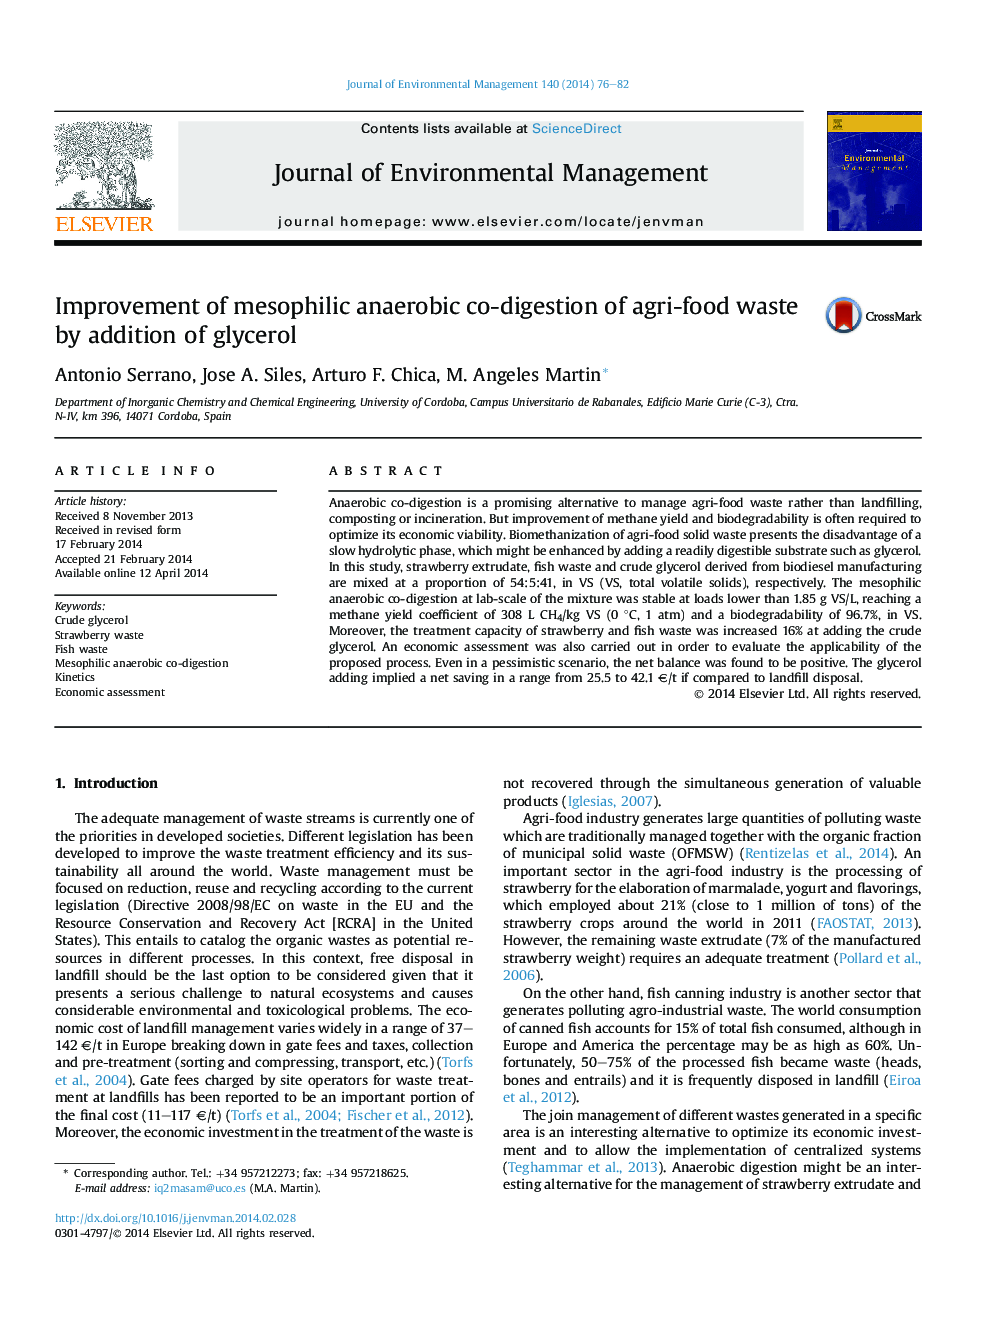 Improvement of mesophilic anaerobic co-digestion of agri-food waste by addition of glycerol